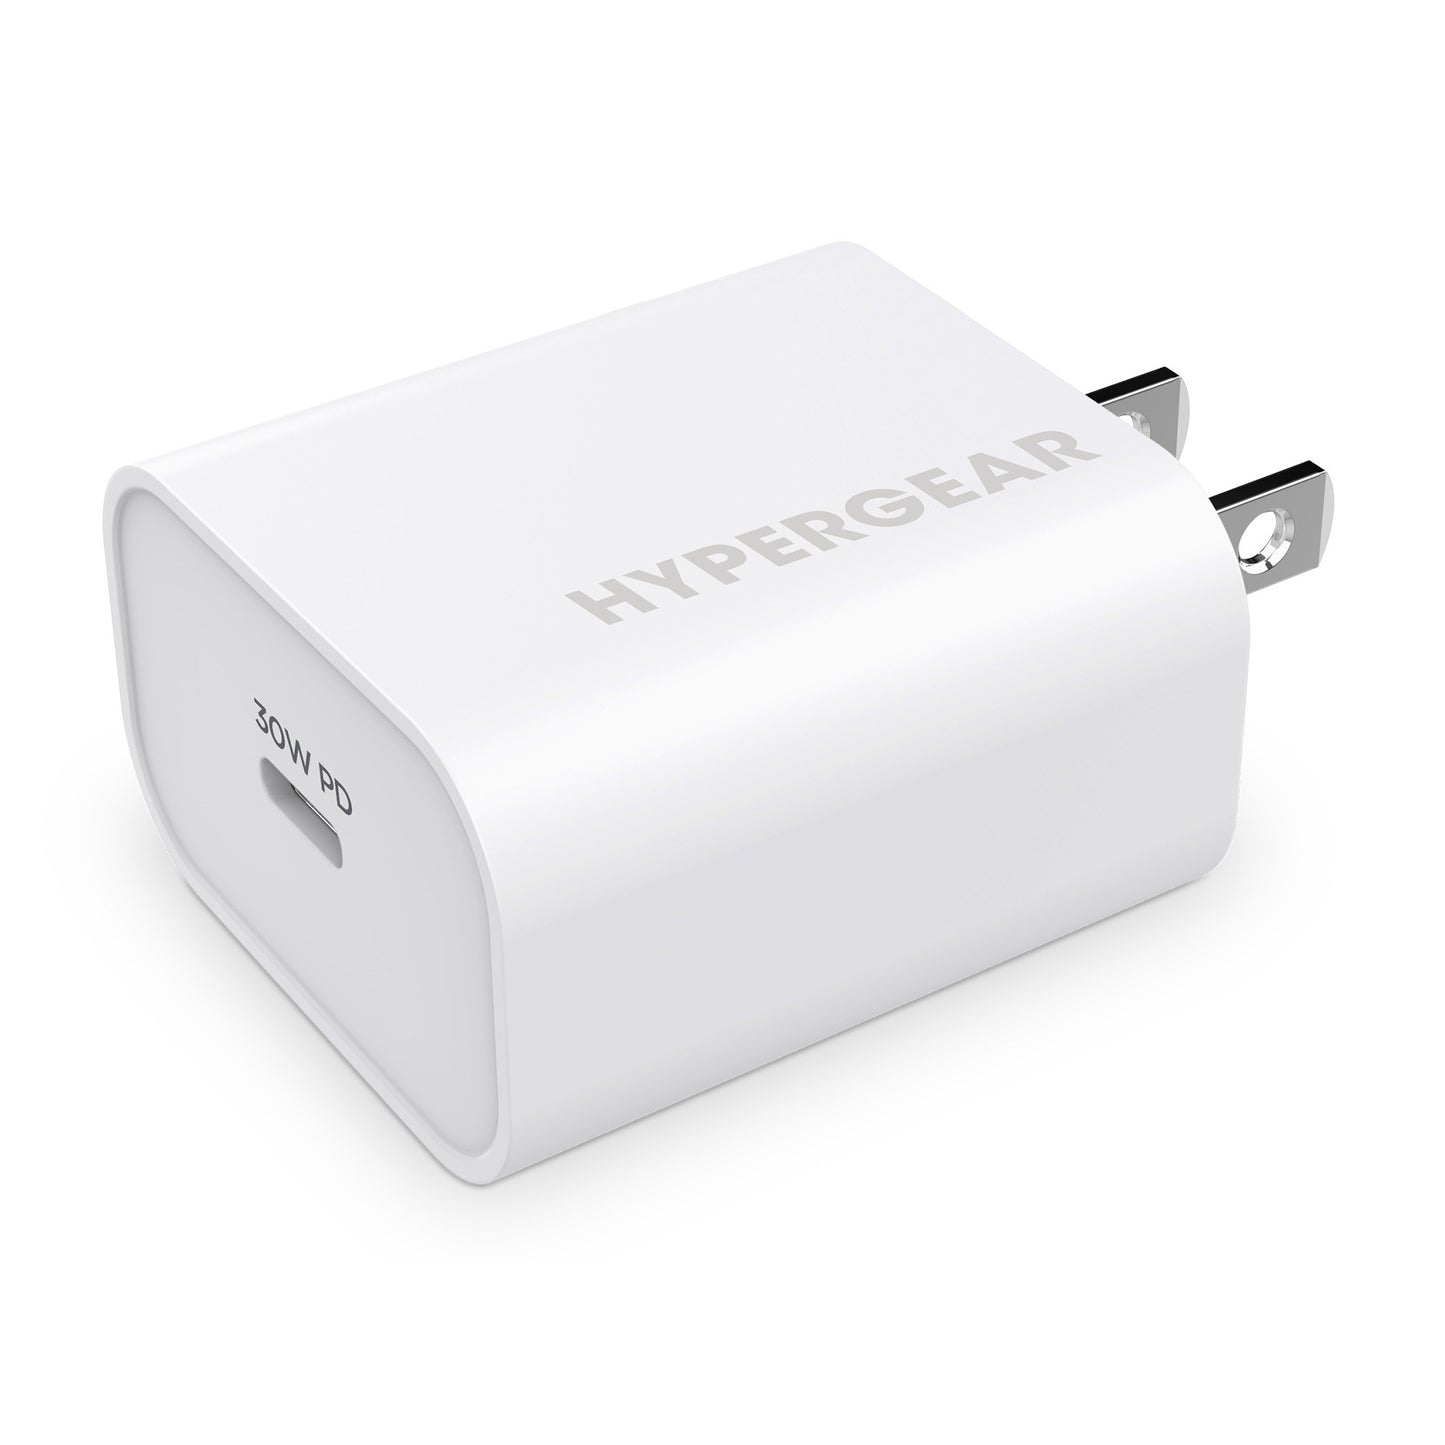 Hypergear 30W USB-C PD Wall Charger Hub - White - 15-10748